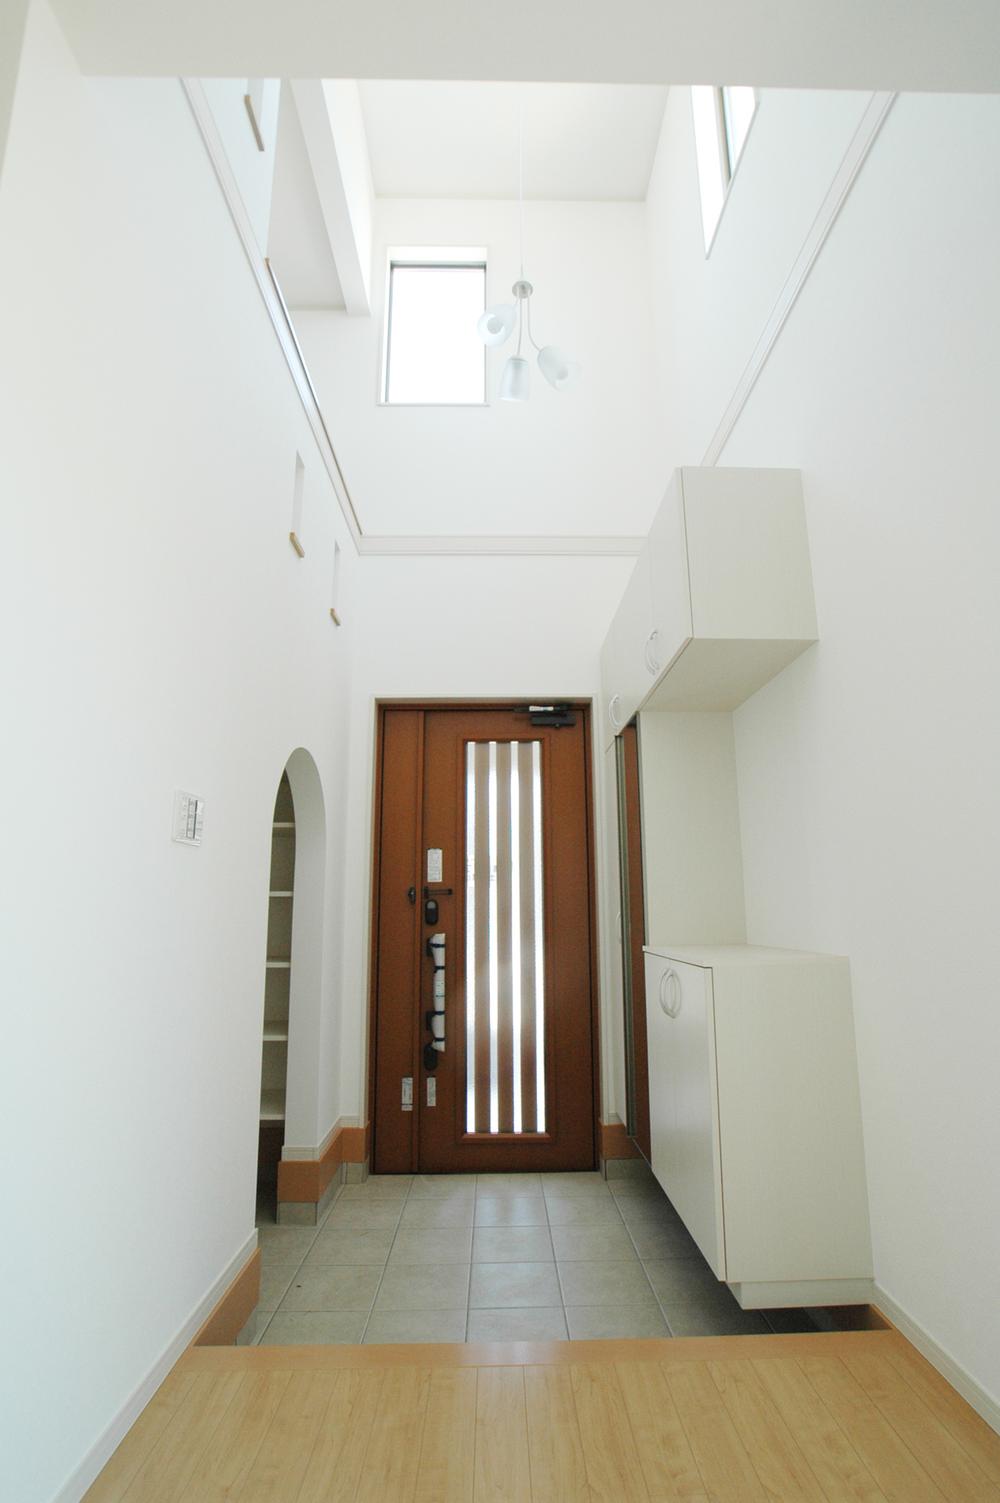 Model house photo. Entrance with a sense of openness